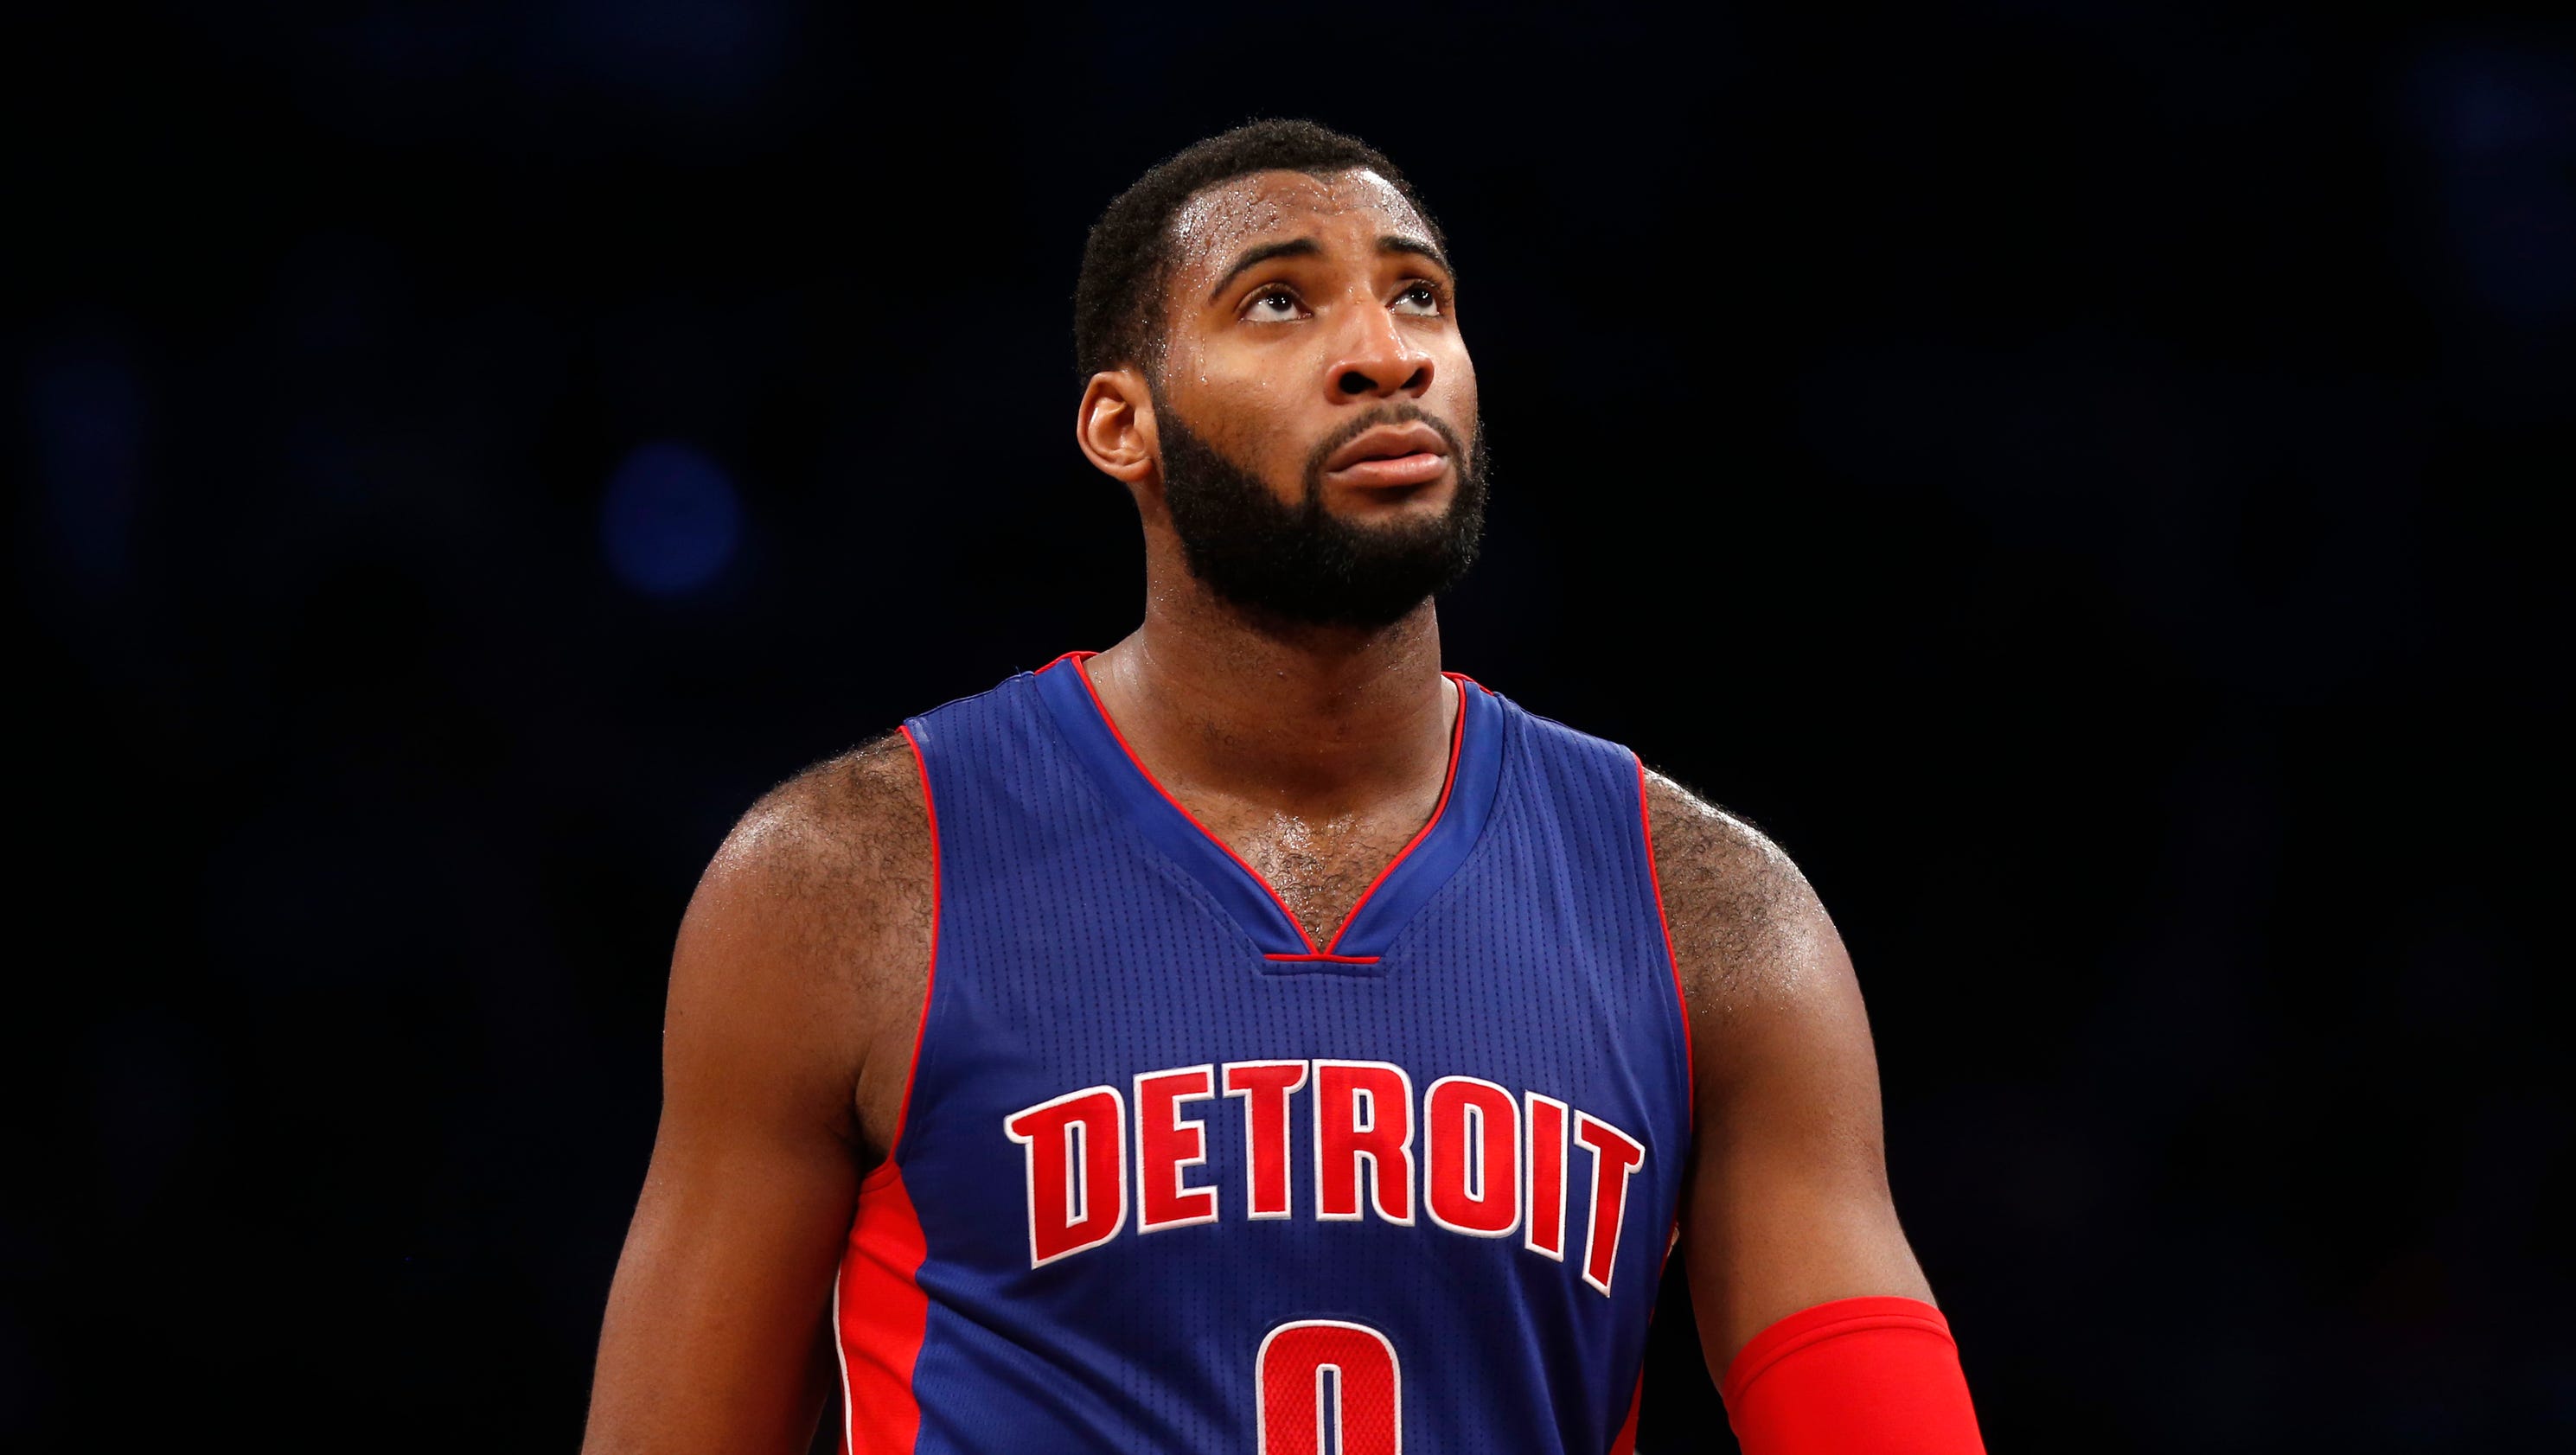 Detroit Pistons' Andre Drummond ranks 35th on SI.com's NBA top 100